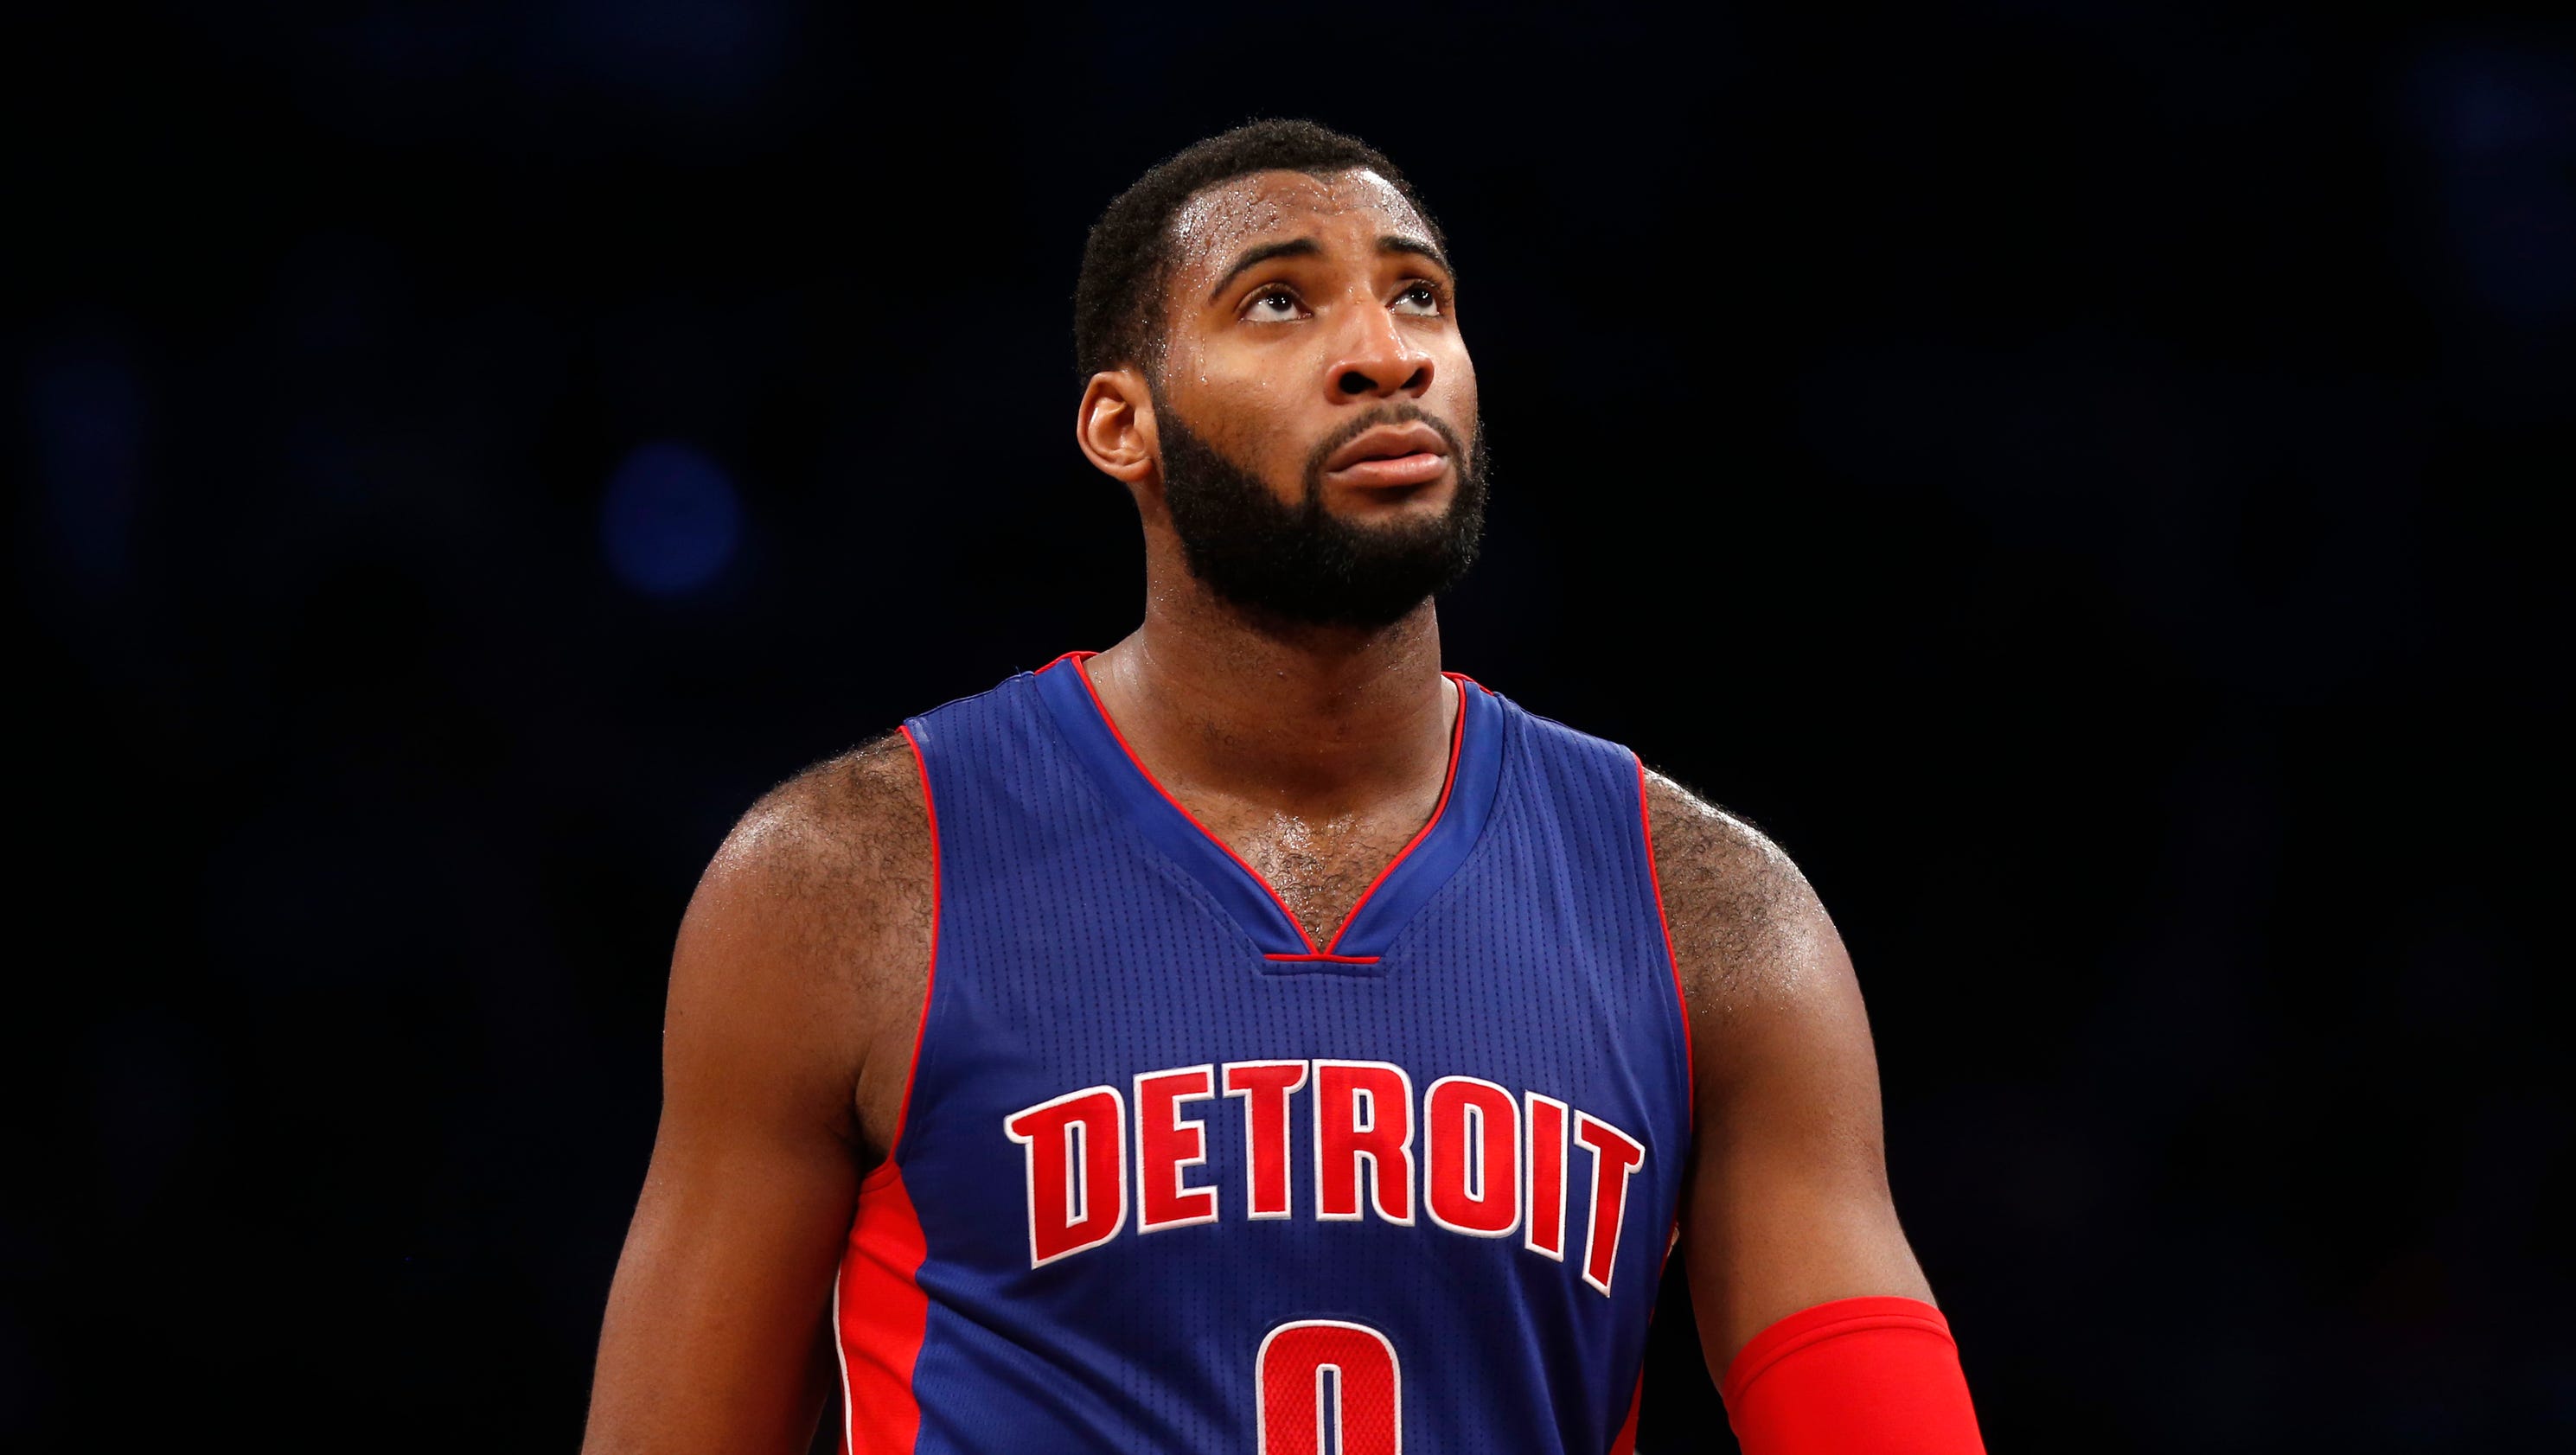 Detroit Pistons' Andre Drummond ranks 35th on SI.com's NBA top 100